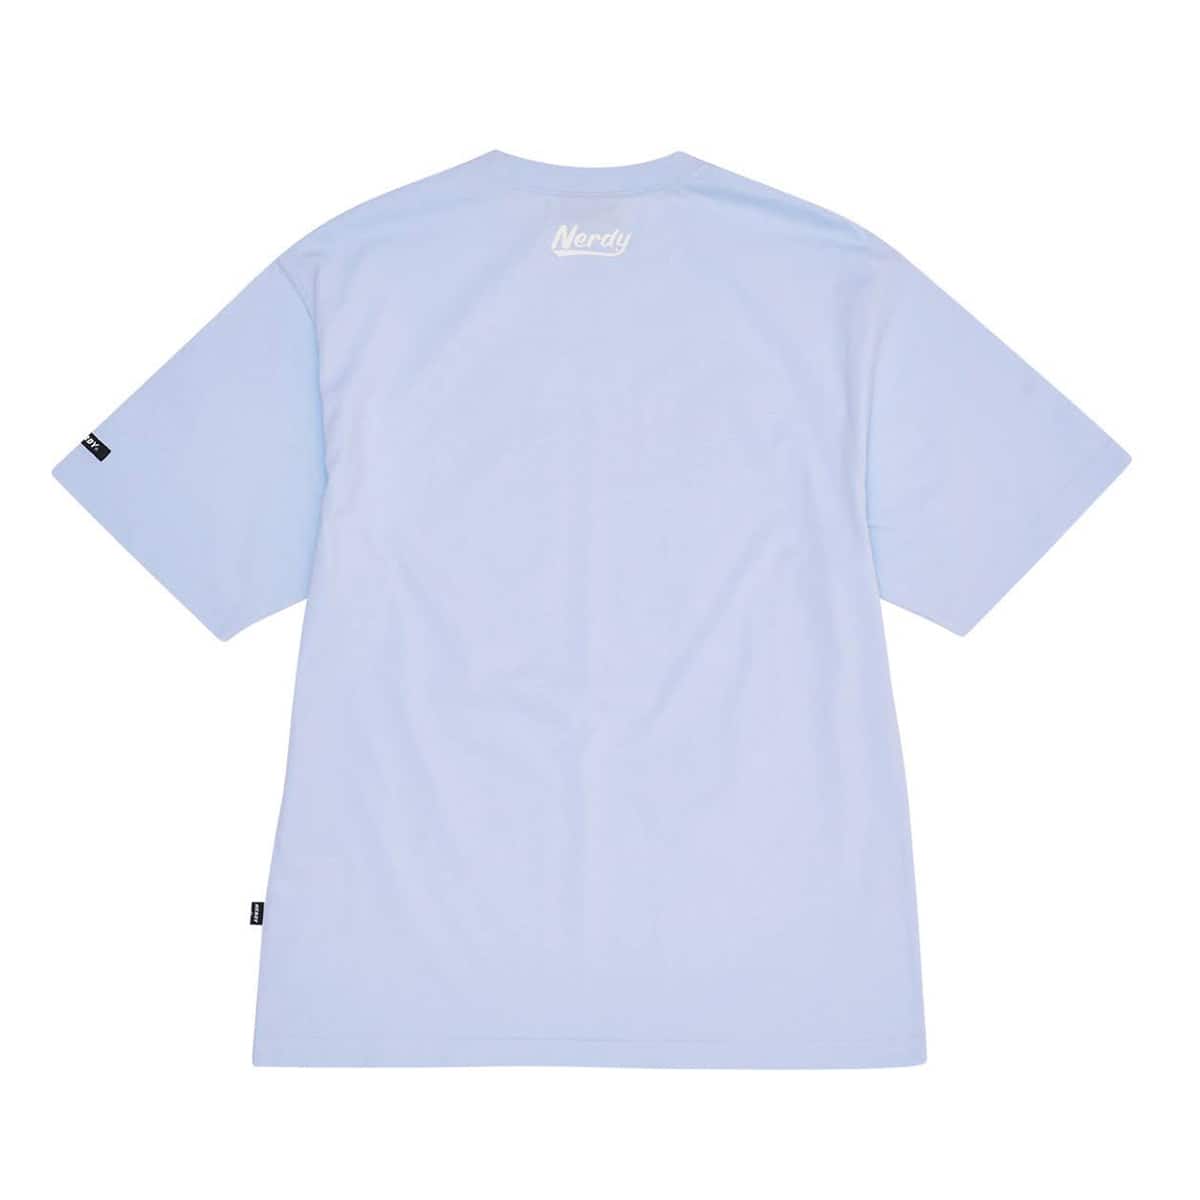 AW Atypical T-Shirt 722 Blue NEBBIA